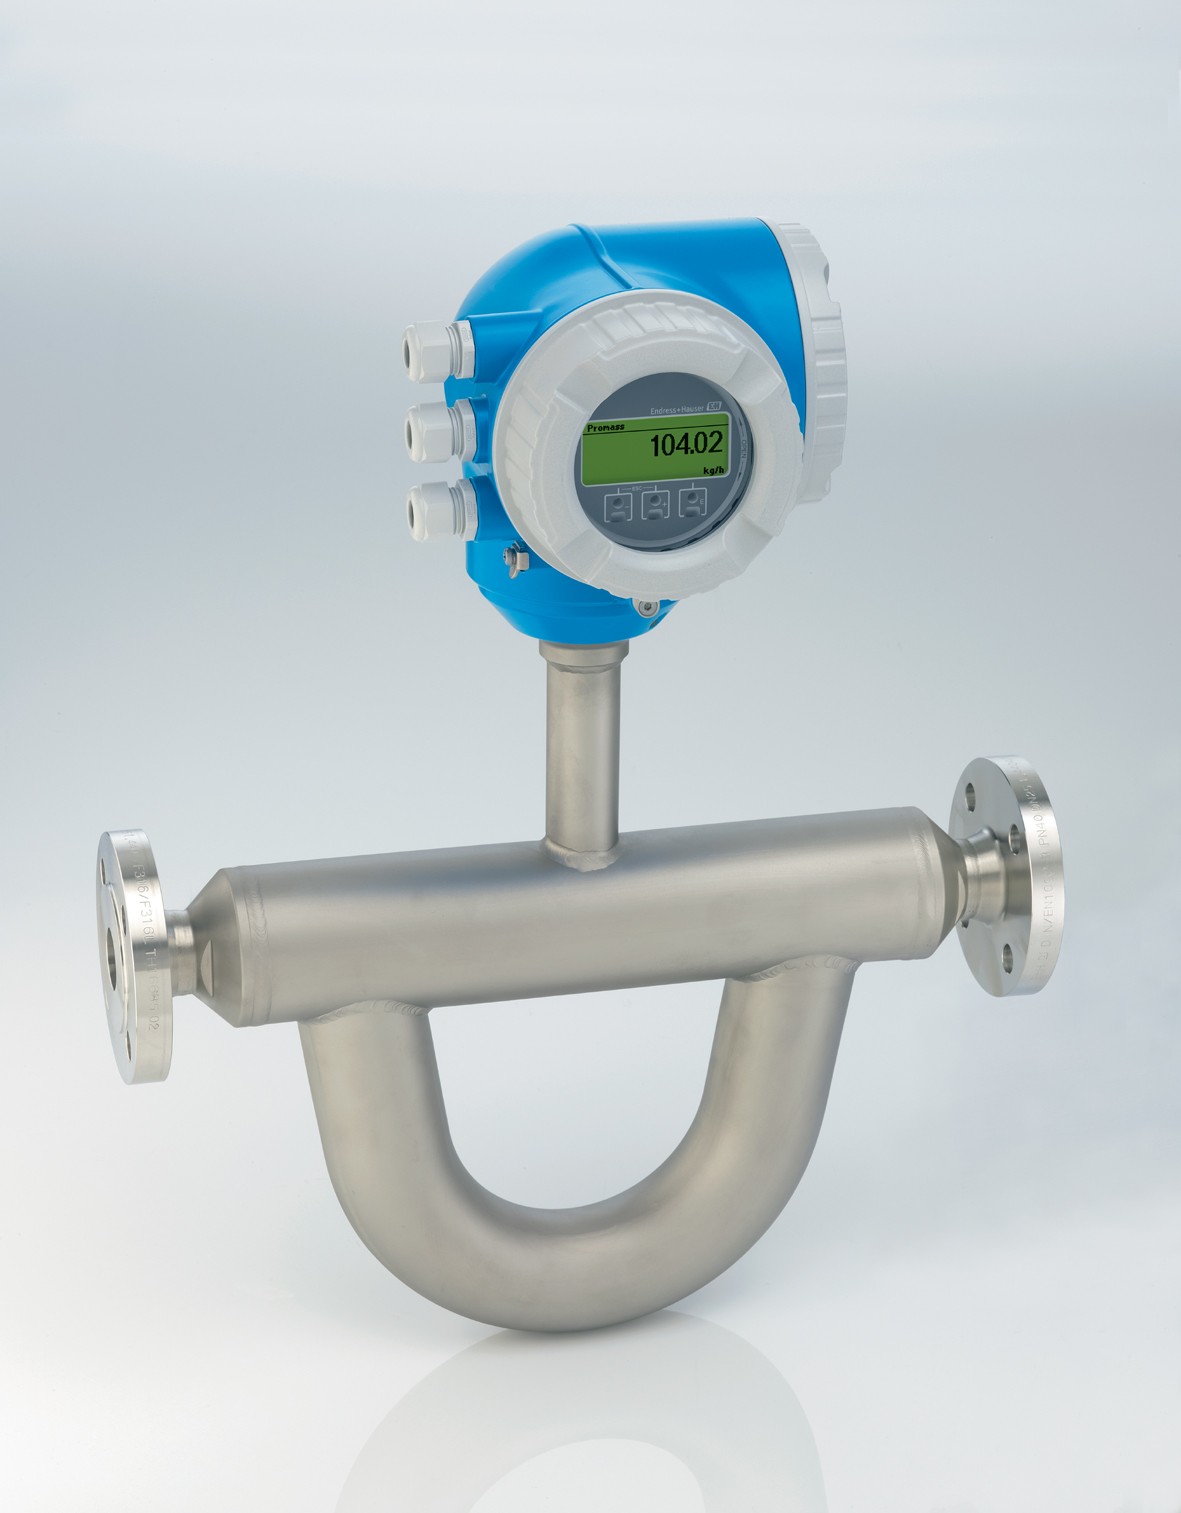 Specialist flowmeter for challenging applications